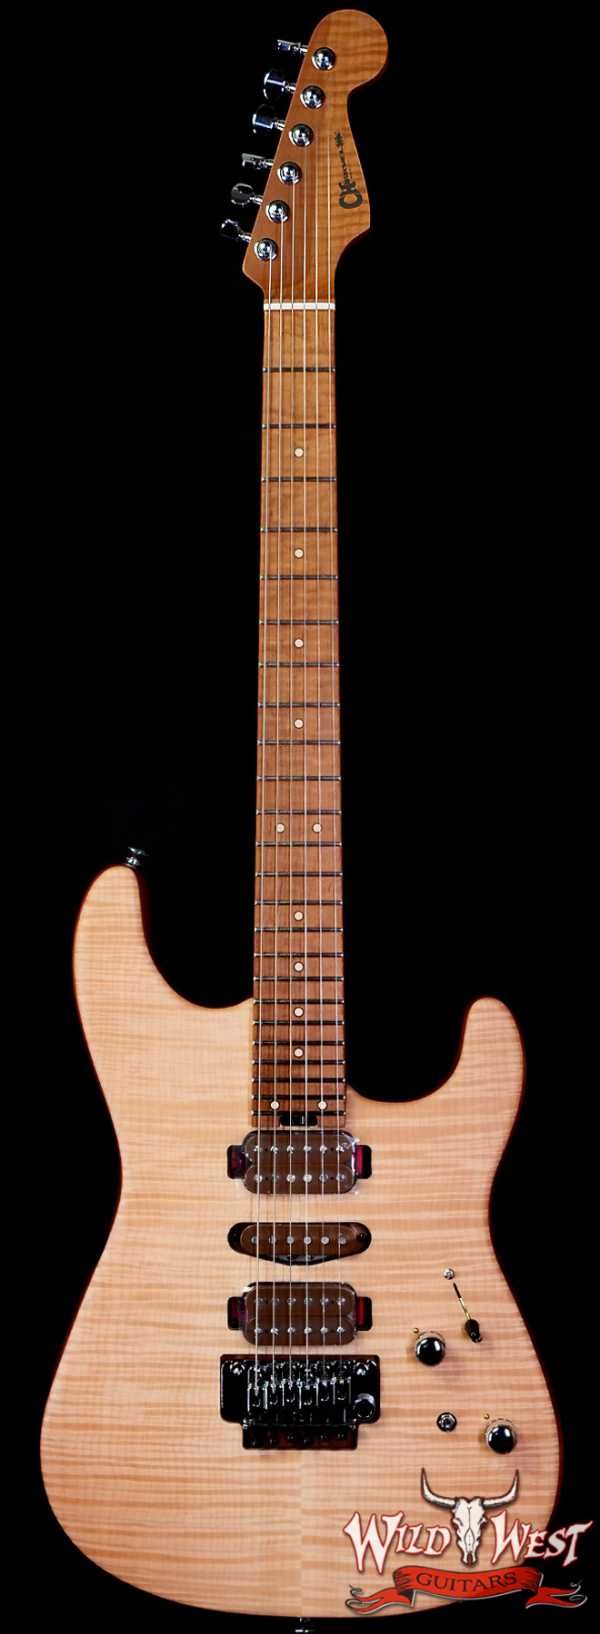 Charvel Custom Shop Guthrie Govan USA Signature HSH Flame Maple Top Caramelized Basswood Body Natural 7.20 LBS